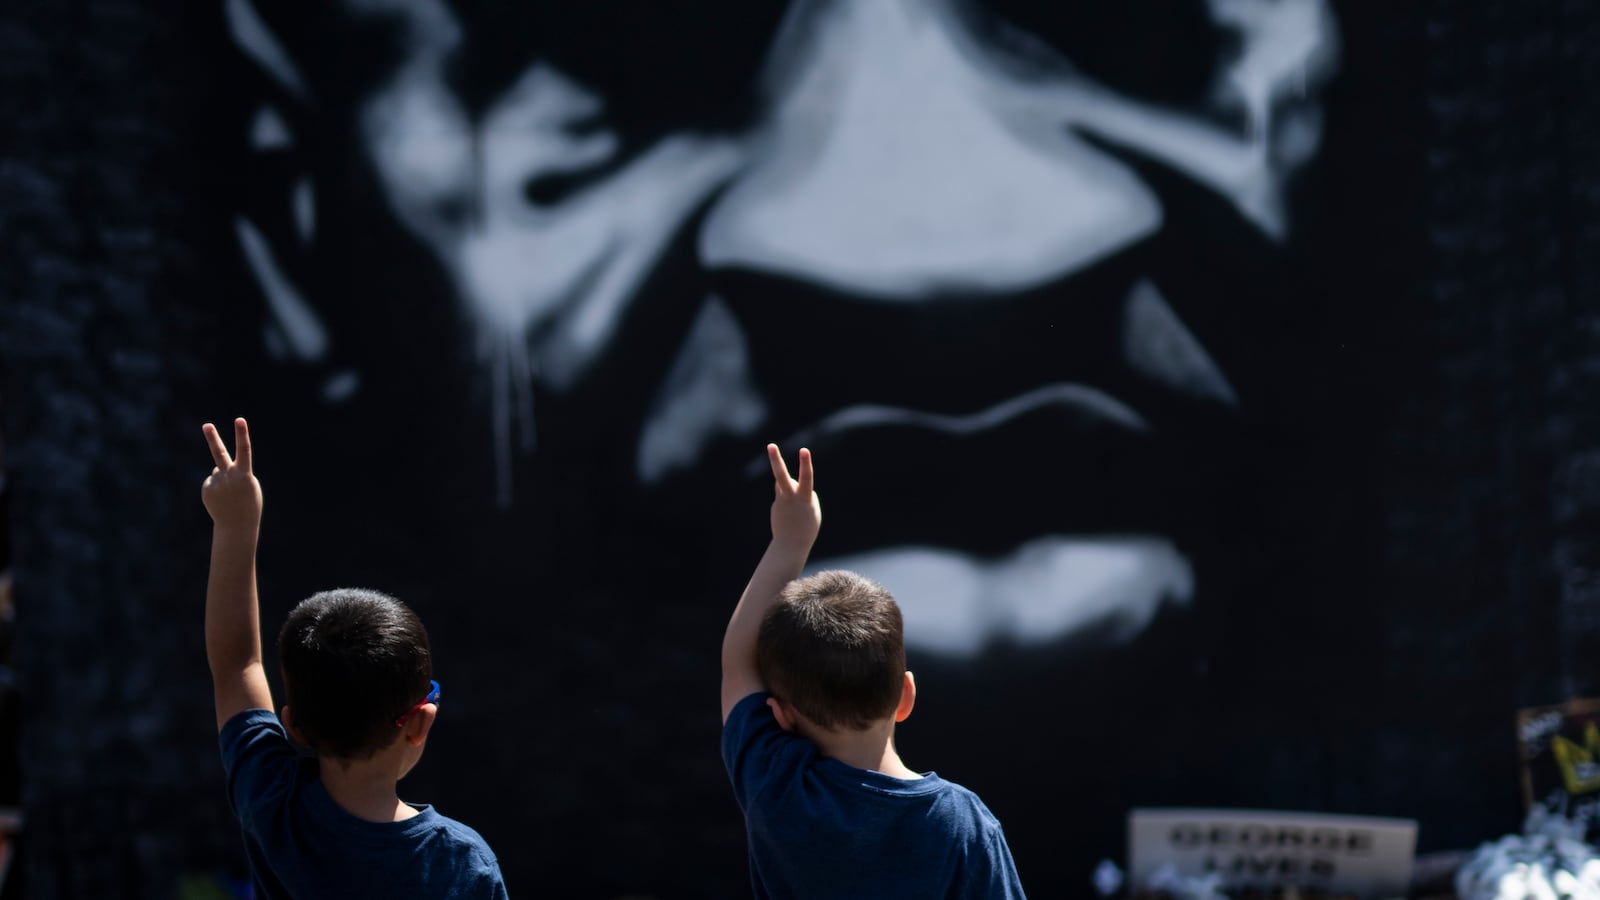 Two little boys, wearing similar blue shirts and shorts, wave a peace sign to a mural of George Floyd. There are rows of flowers between them and the mural.